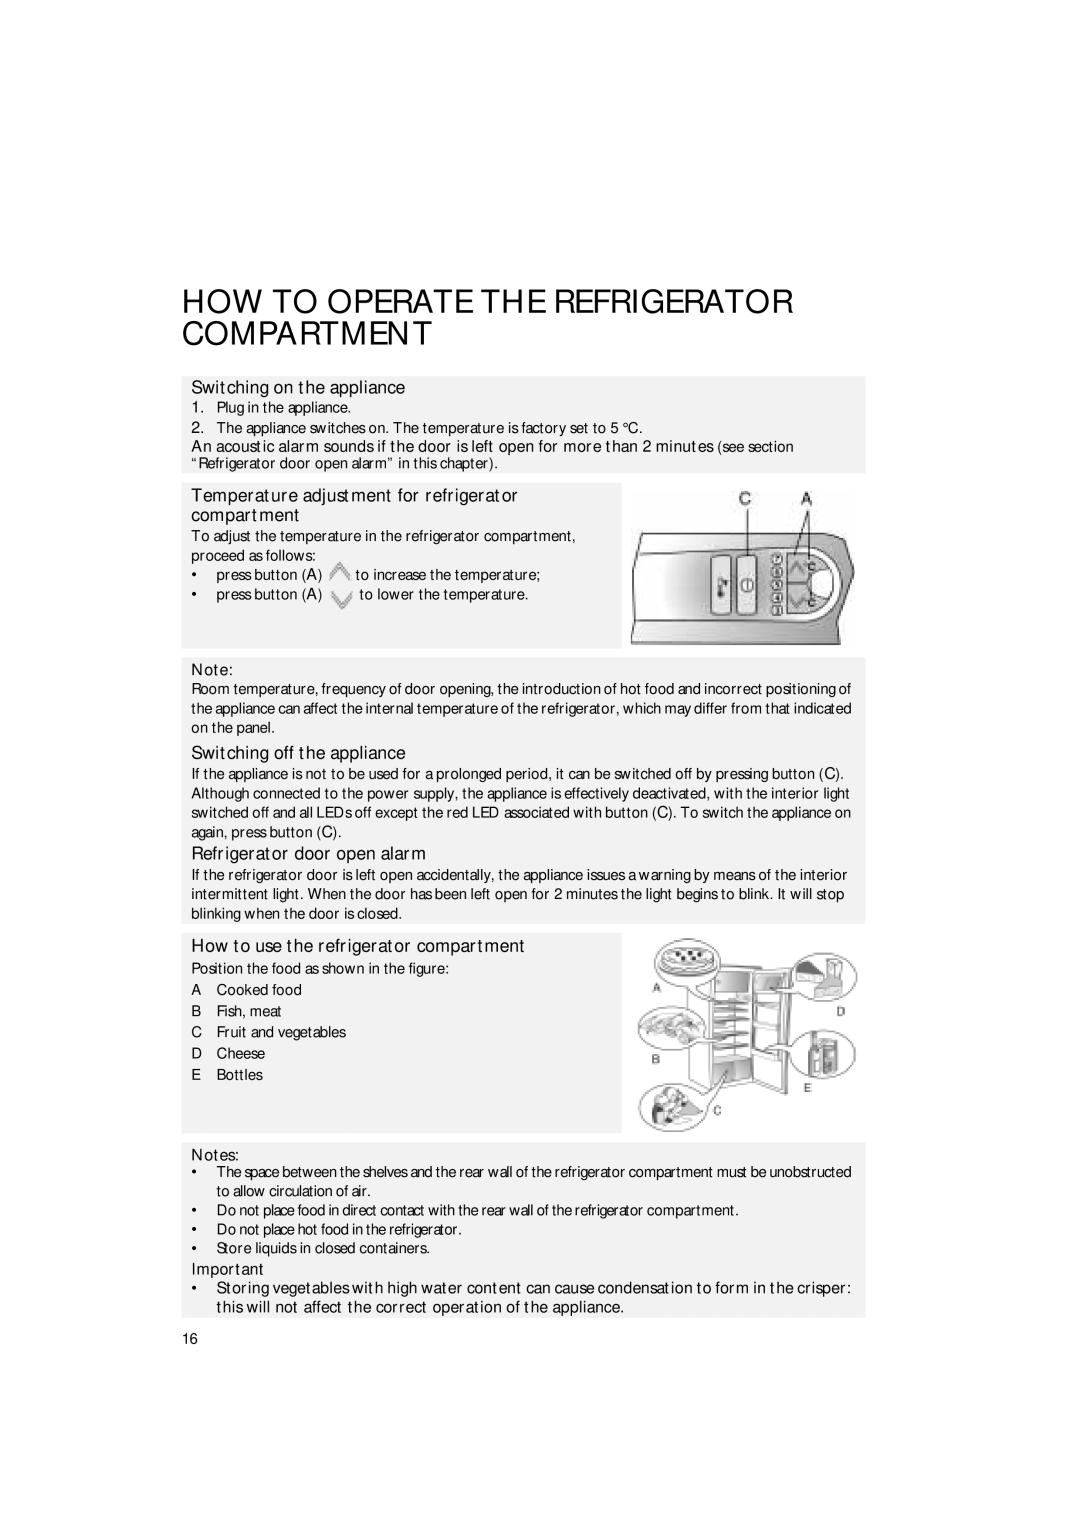 Smeg FR310APL Switching on the appliance, Temperature adjustment for refrigerator compartment, Switching off the appliance 